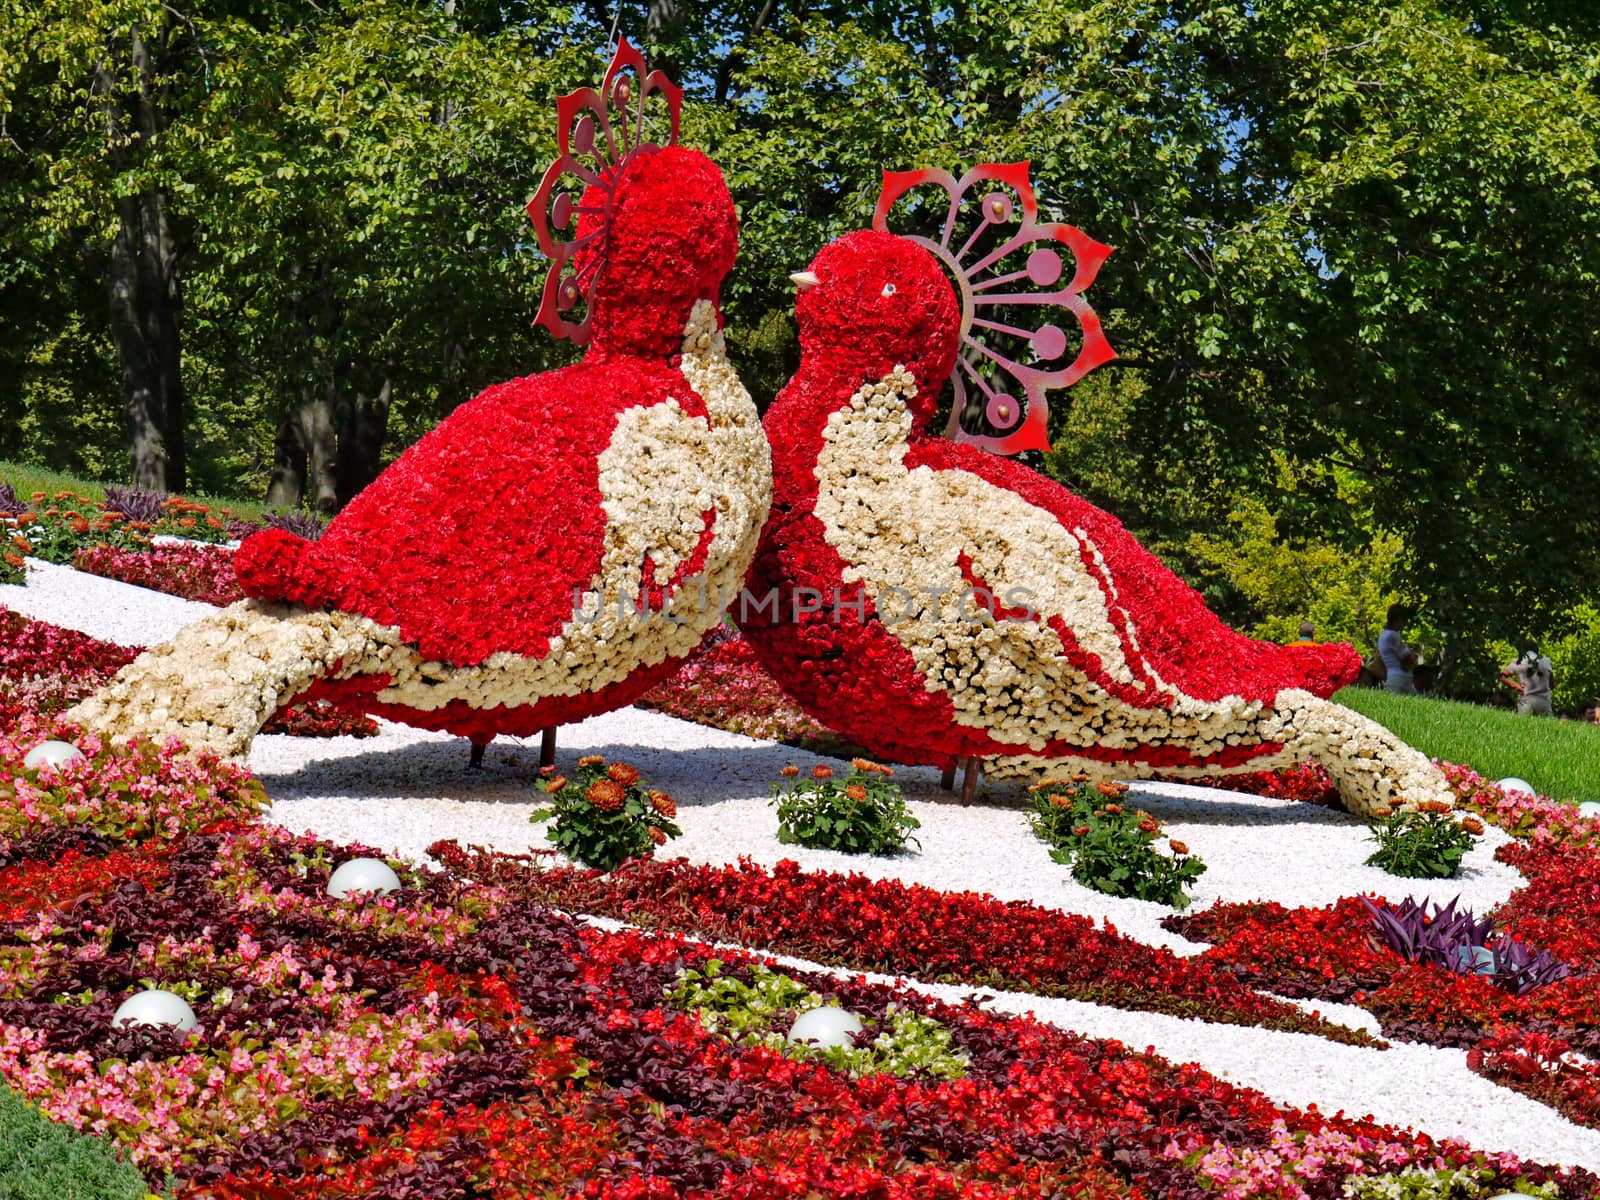 Silhouette of two large birds made of red and white flowers against the background of a beautiful flowerbed and deciduous trees.